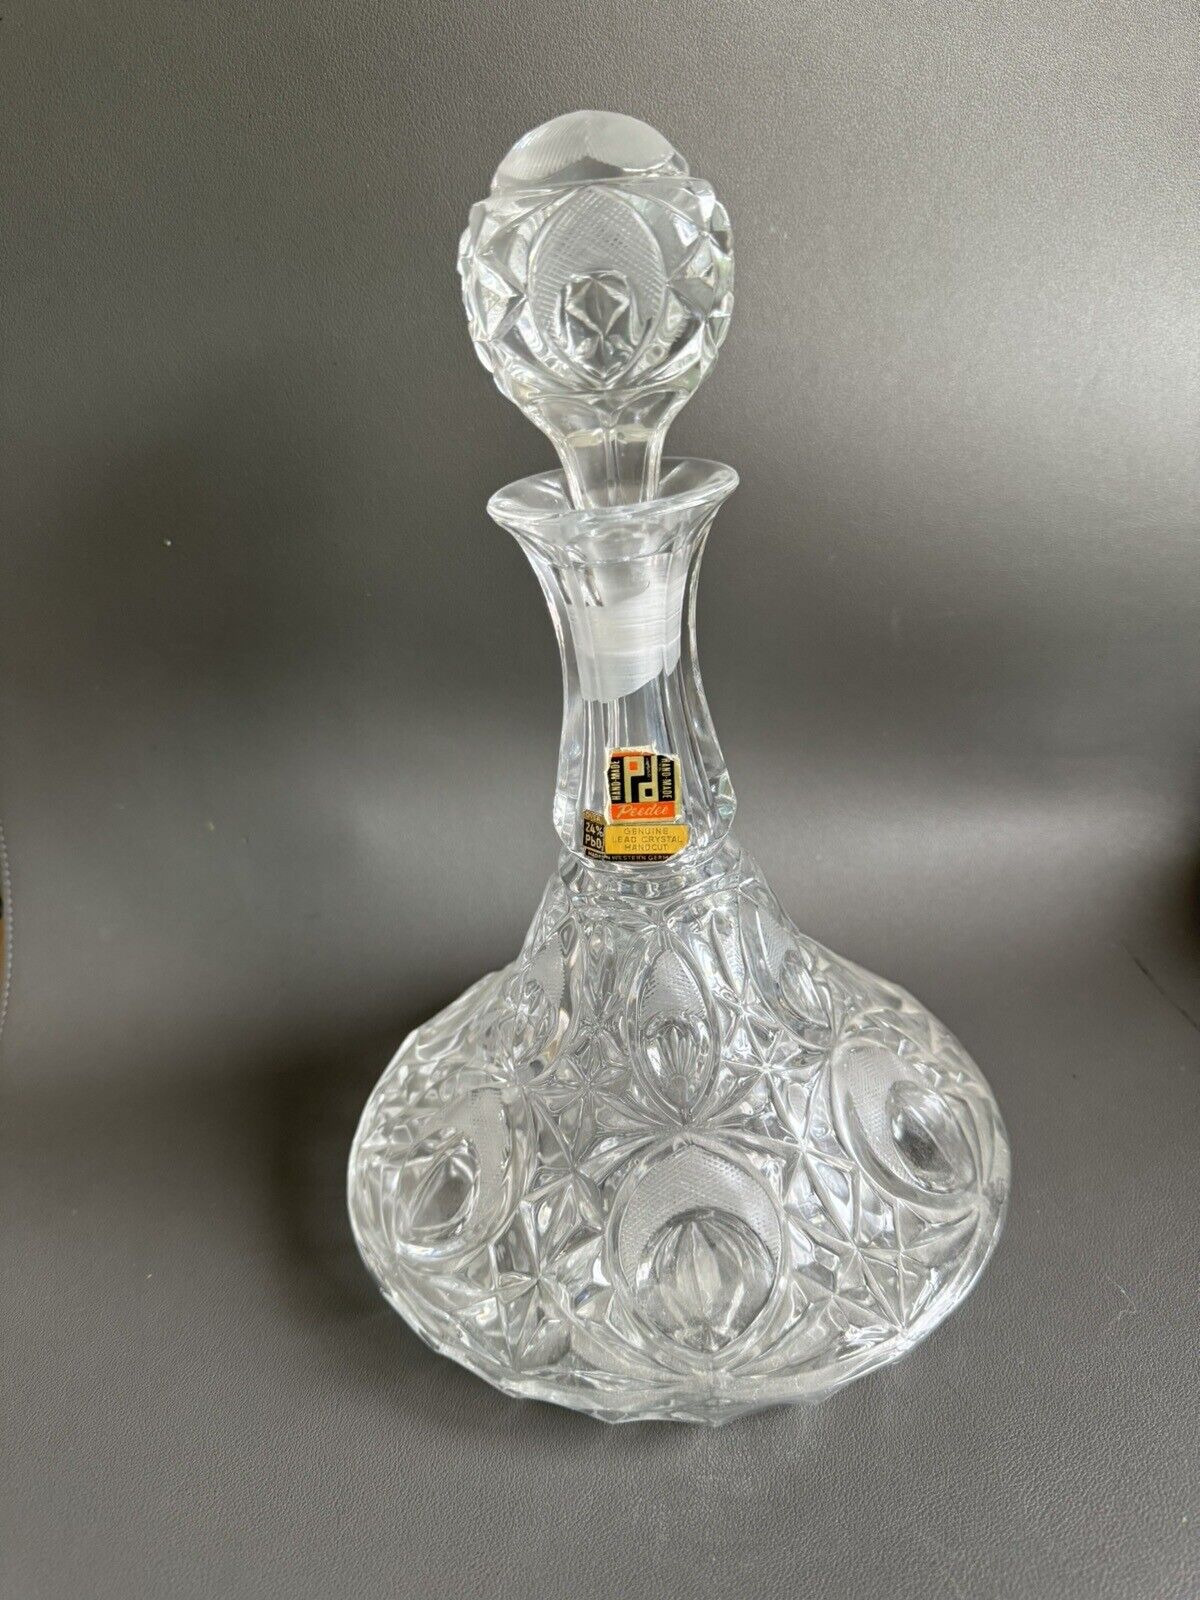 Vtg Etched Decanter Lead Crystal Peedee West Germany 1950’s Glass Ware RARE FIND